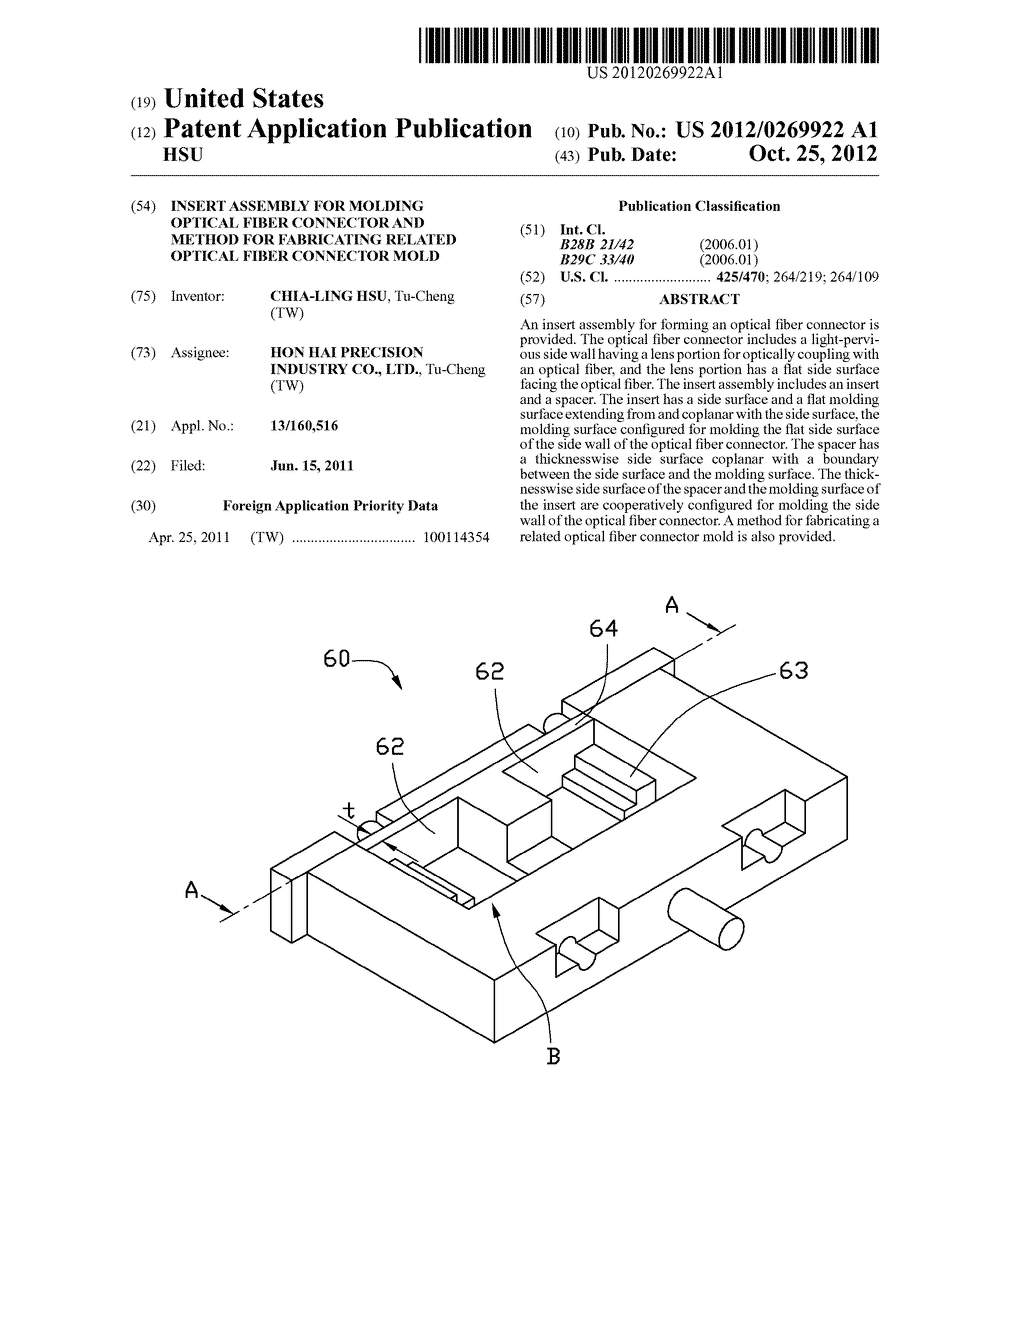 INSERT ASSEMBLY FOR MOLDING OPTICAL FIBER CONNECTOR AND METHOD FOR     FABRICATING RELATED OPTICAL FIBER CONNECTOR MOLD - diagram, schematic, and image 01